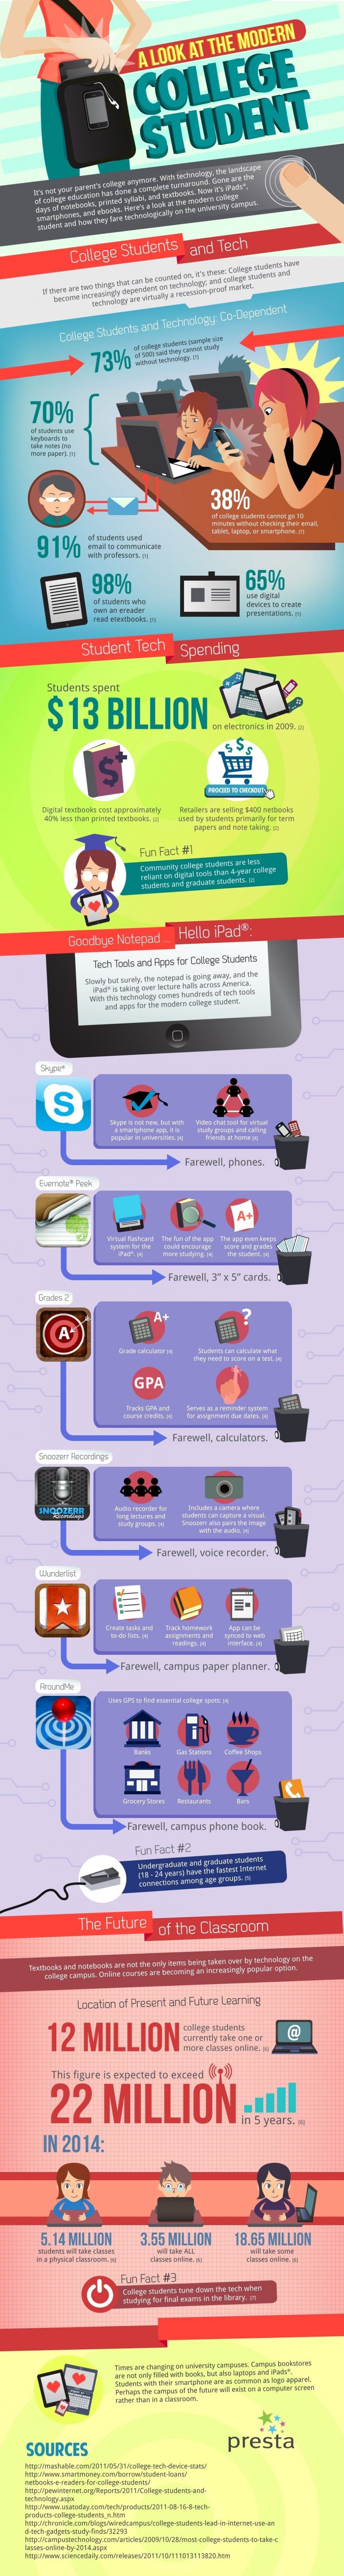 The Modern College Student Infographic